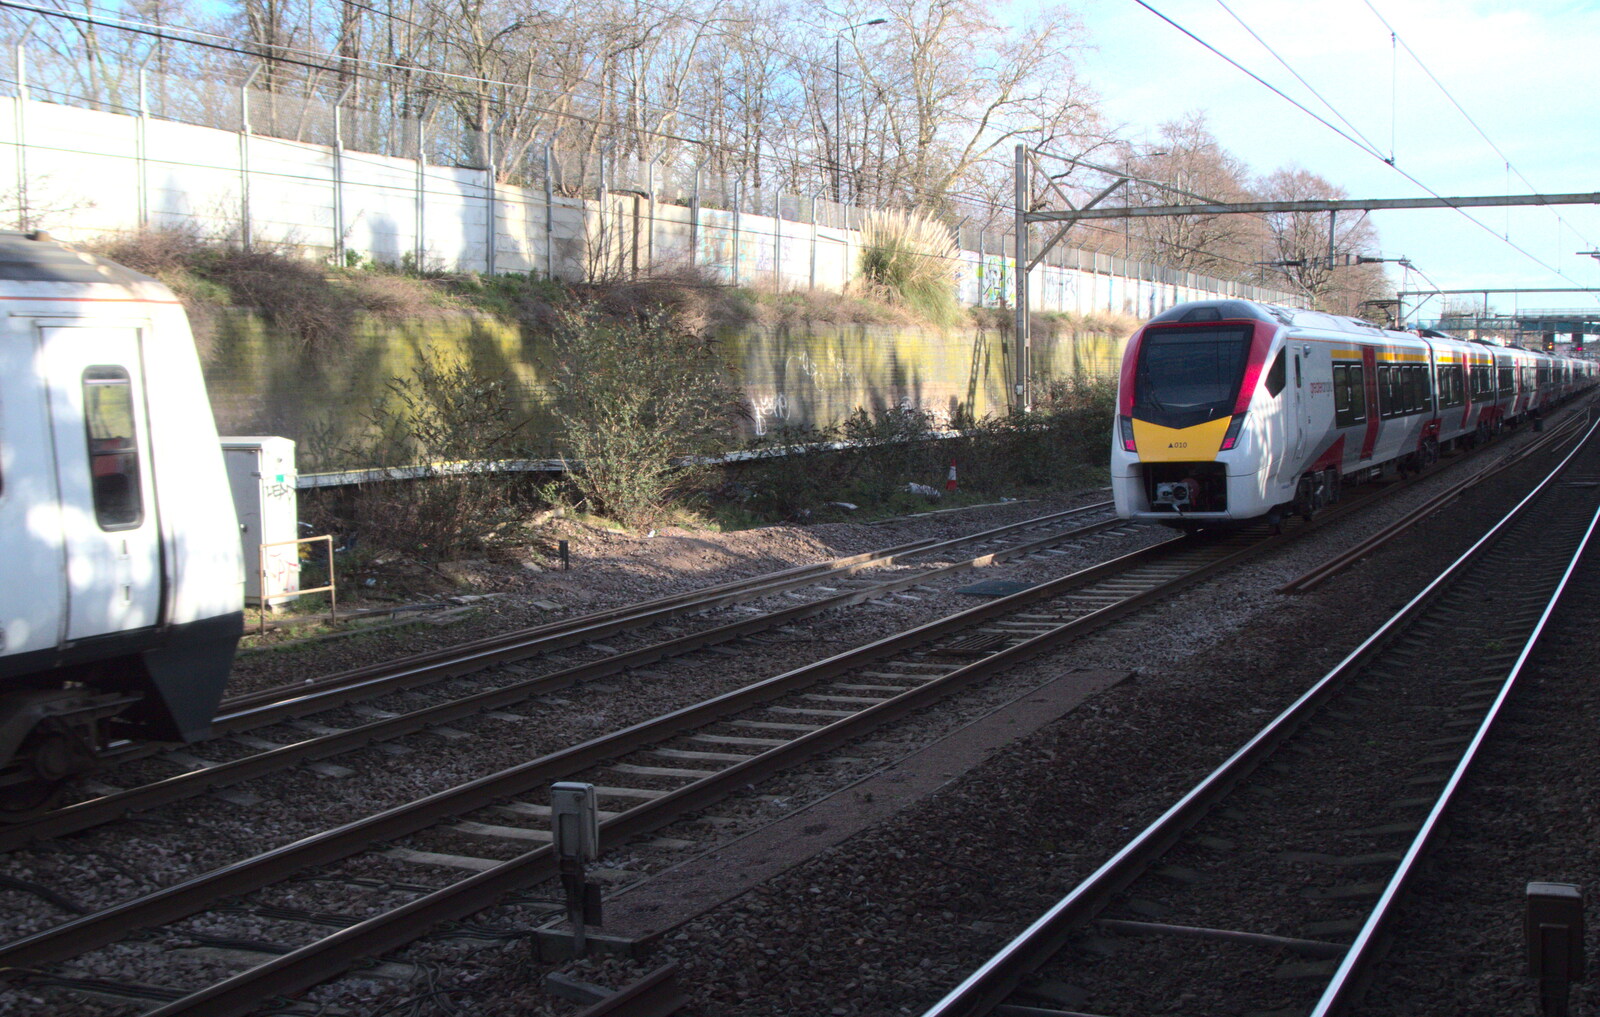 Broken-down Freight Trains, Manor Park, London - 28th January 2020: One of Greater Anglia's new trains is on trial